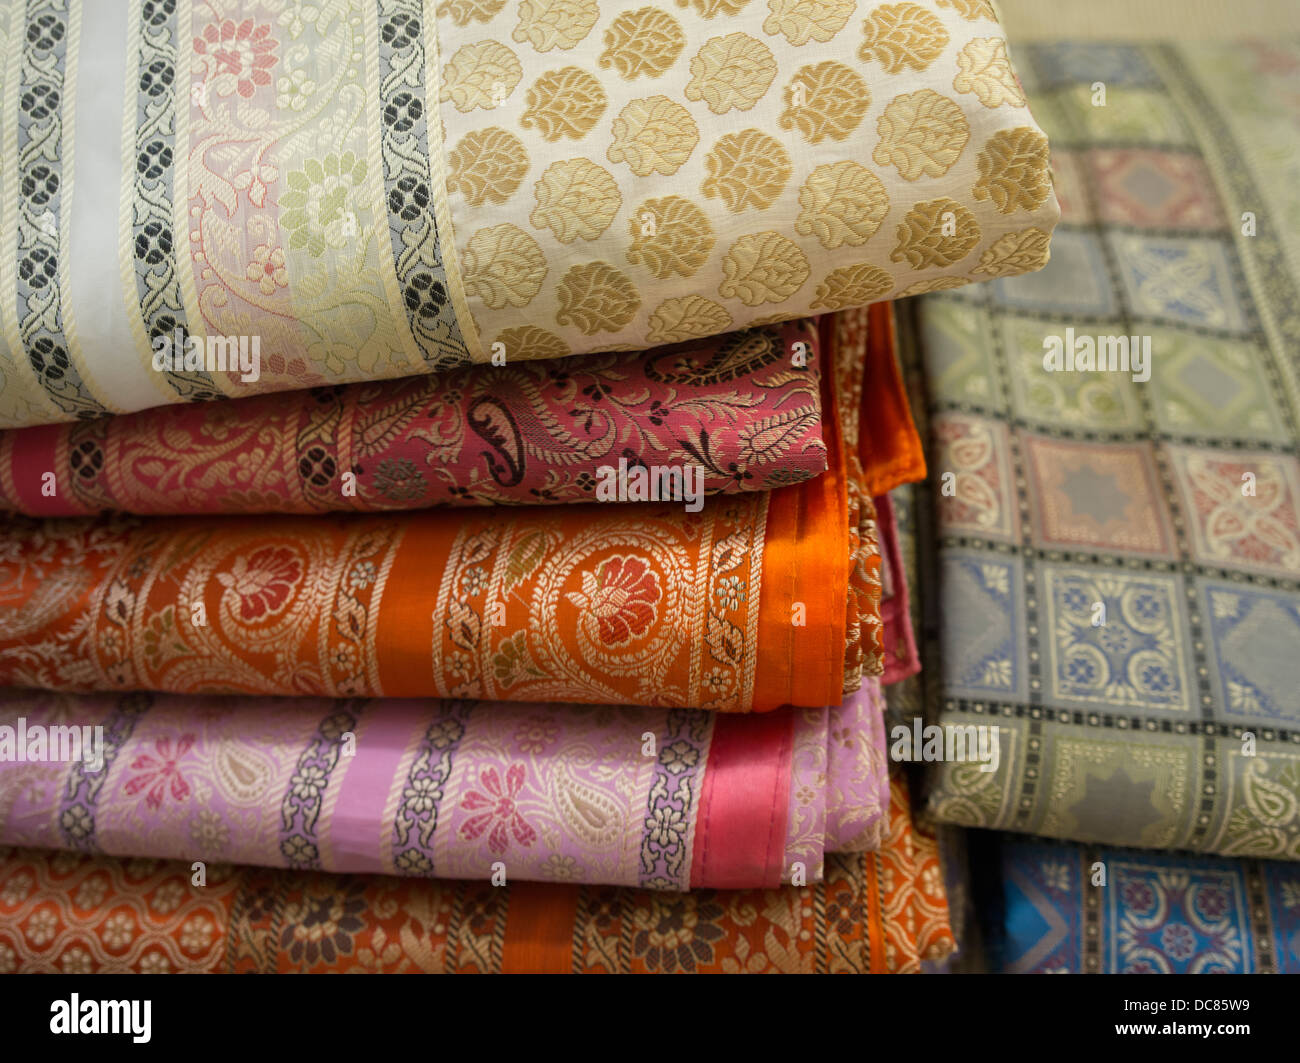 Saris, pashminas, shawls and scarfs made of silk, cashmere, and wool on sale in Varanasi India Stock Photo